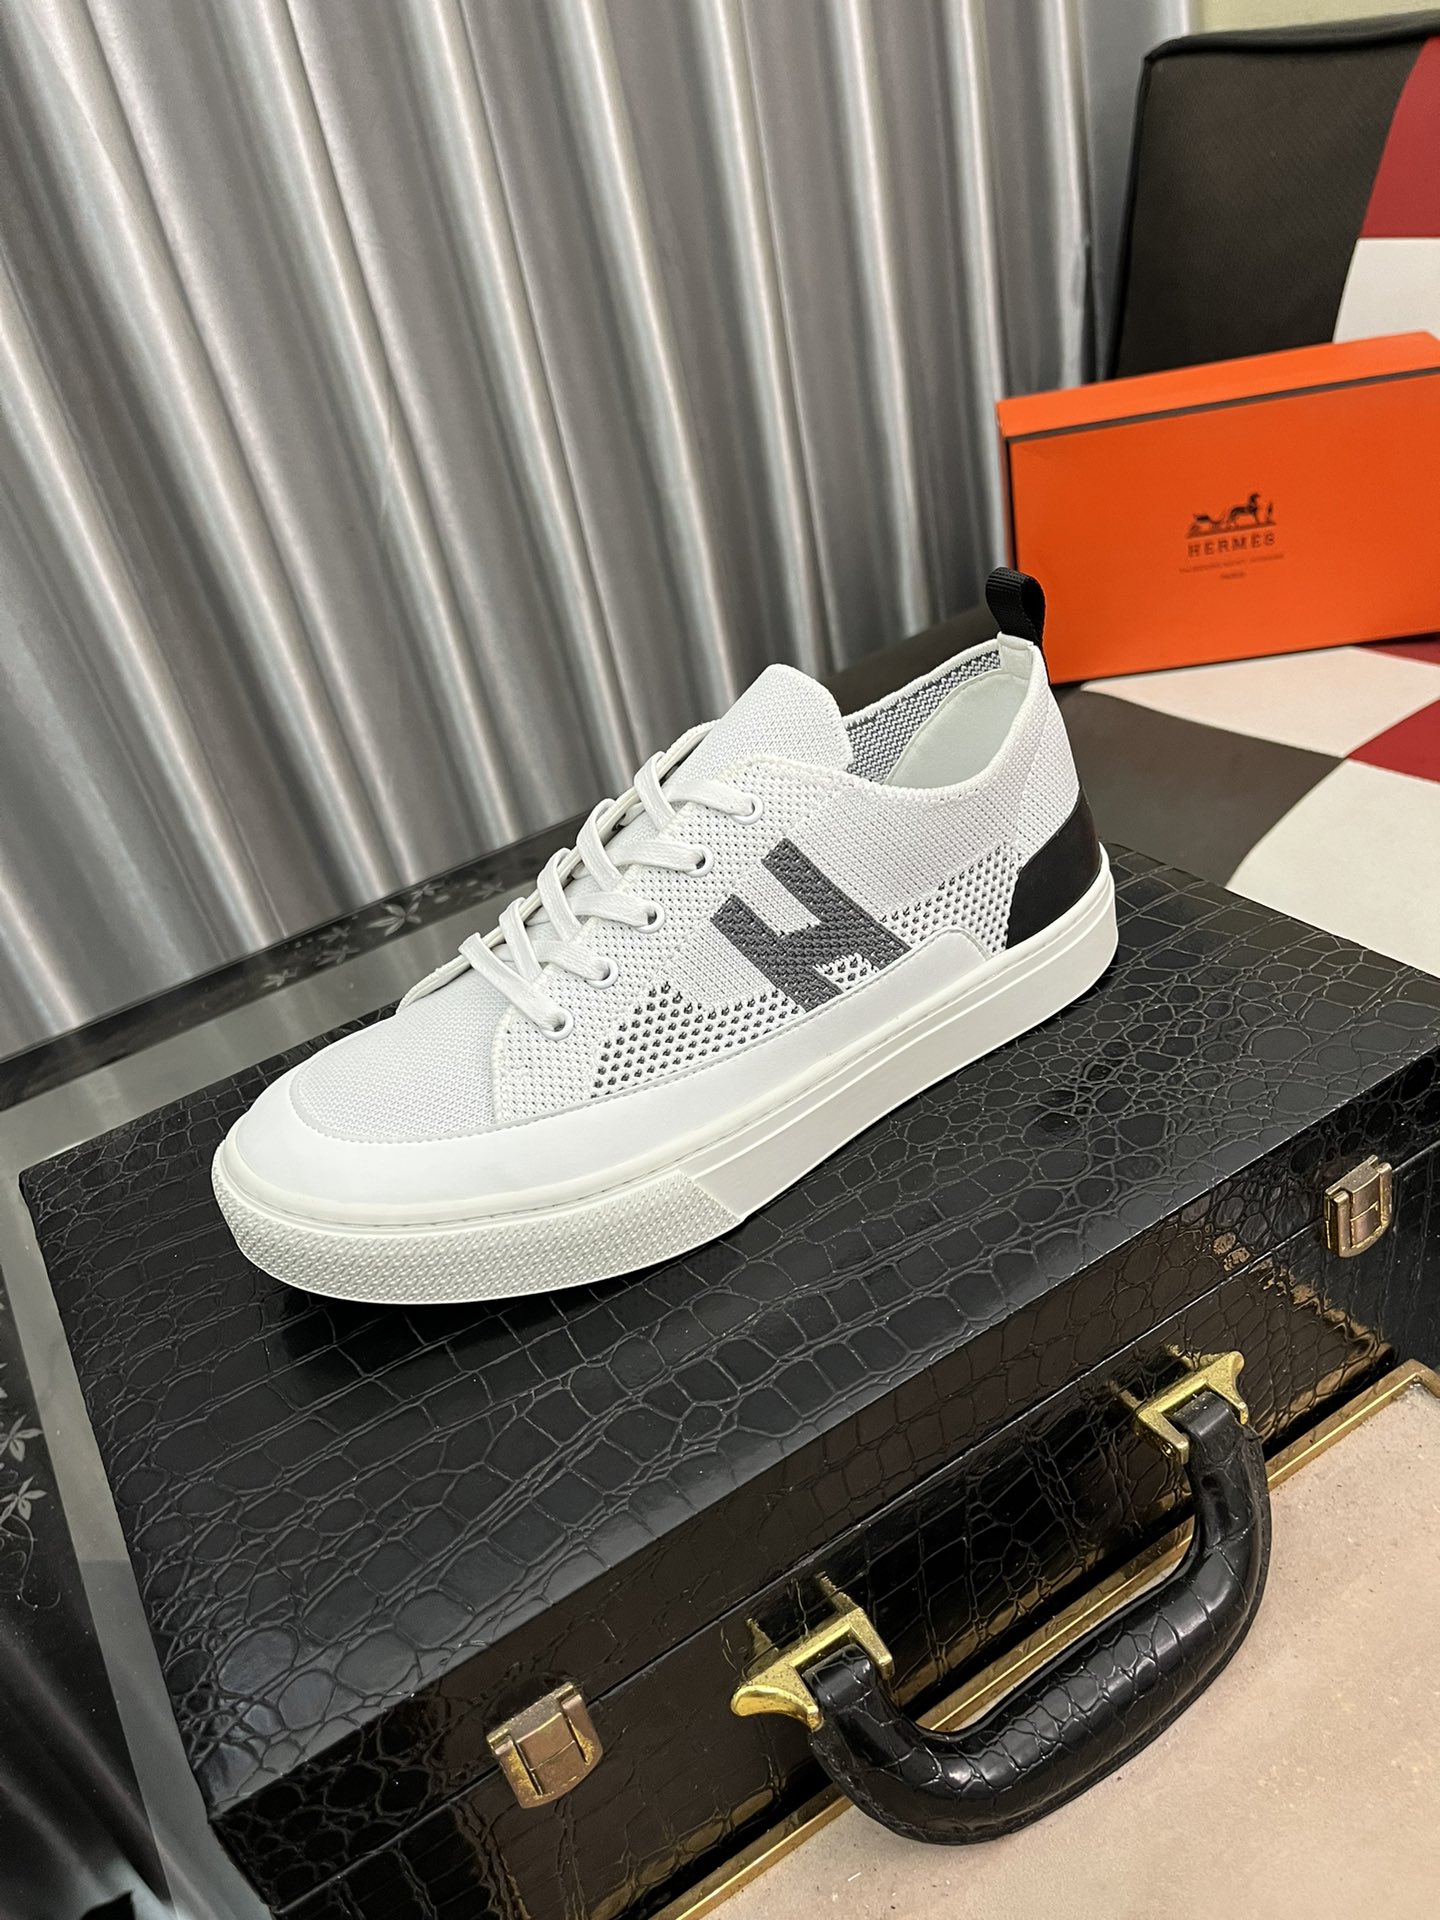 Hermes Shoes Sneakers Splicing Men Cowhide Fashion Casual